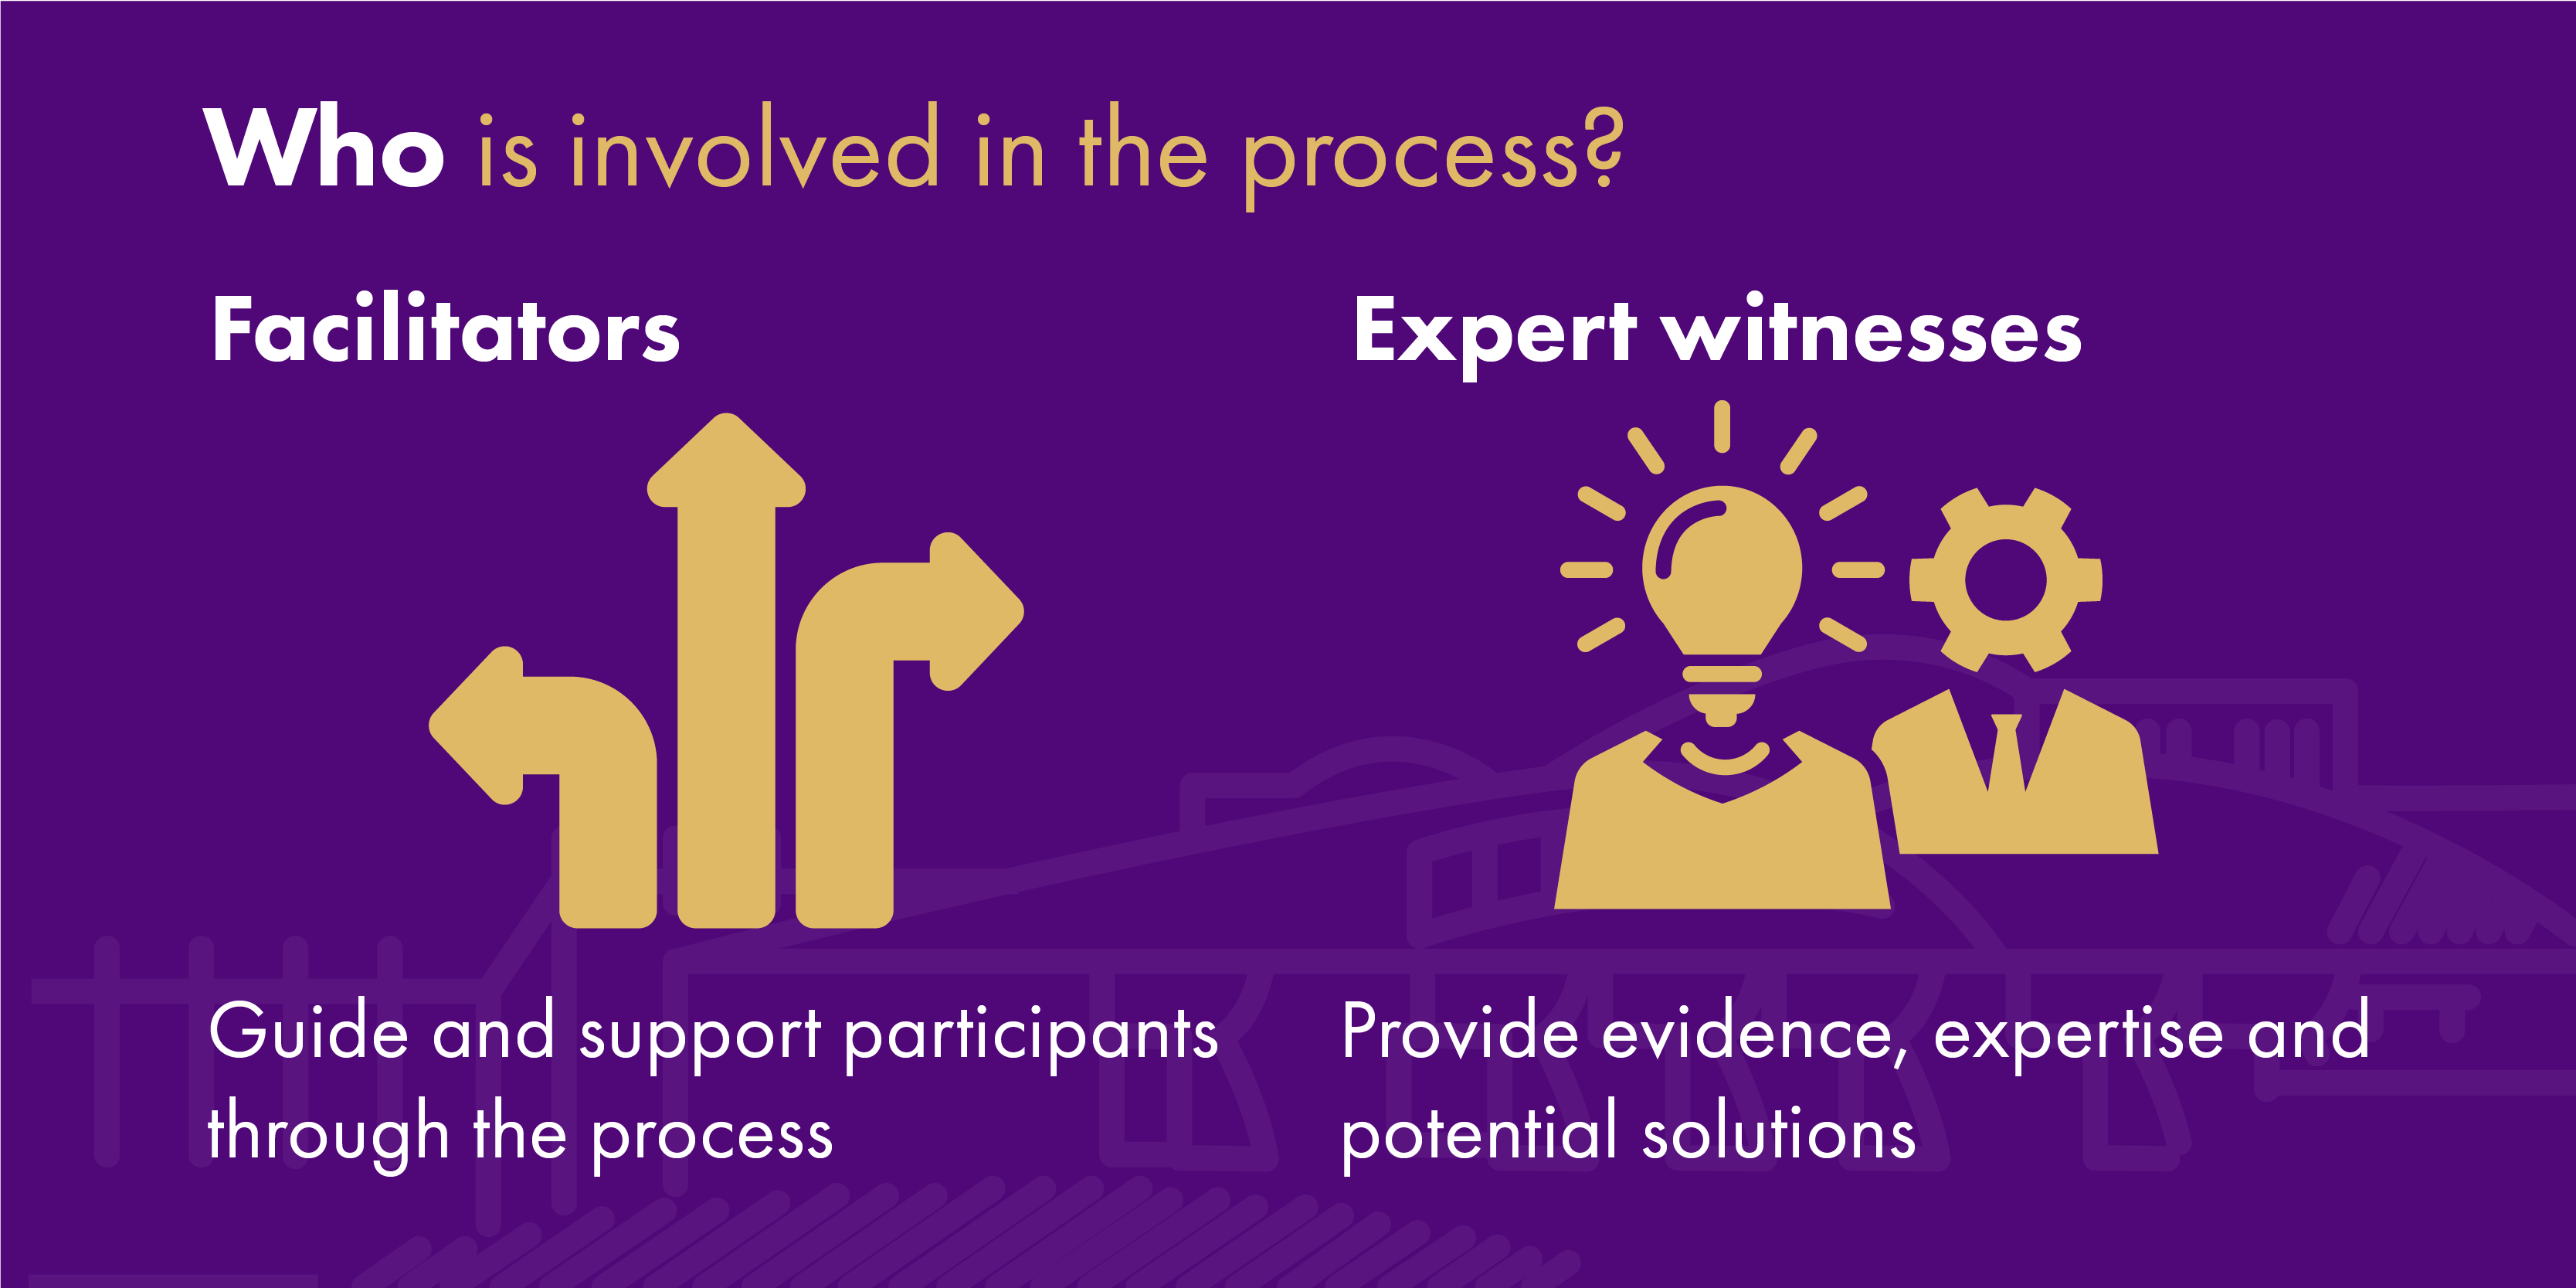 Infographic explaining the facilitation process. On a purple background, the title reads "Who is involved in the process?". The infographic shows two headers and images. On the left, the header says 'Facilitators" has three arrows beneath it pointing in different directions, and the caption "Guide and support participants through the process". On the right, the header is 'Expert Witnesses', above a graphic of two figures shown from the chest up. One figure has a light bulb where their head would be. The other figure, wearing a suit and tie, has a machinery cog instead of a head. The caption beneath says "Provide evidence, expertise and potential solutions".